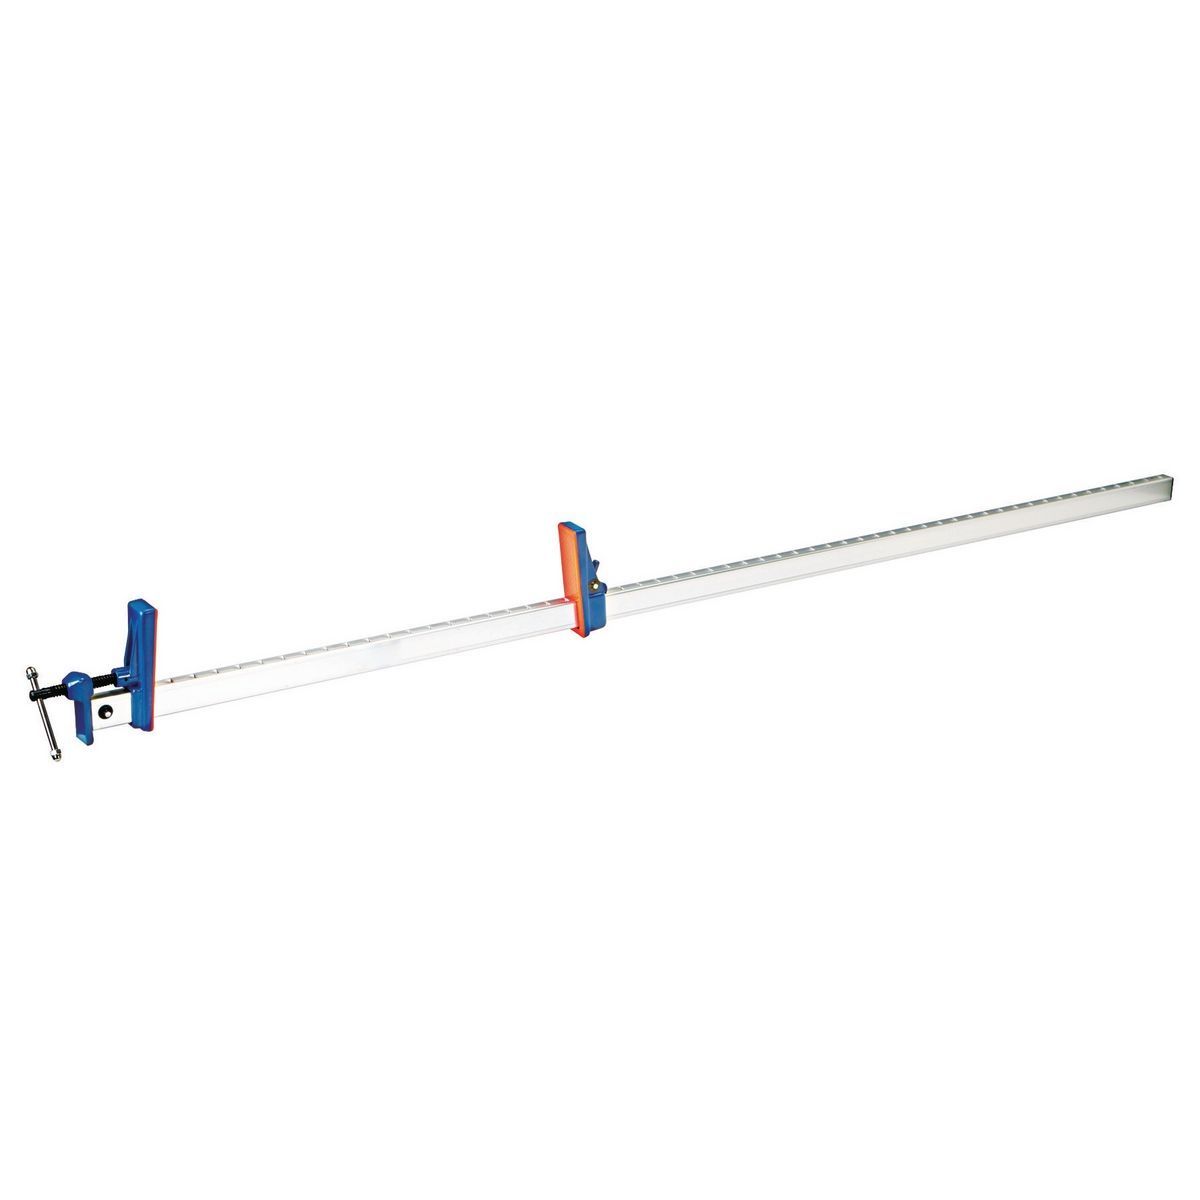 PITTSBURGH 60 in. Aluminum F-Style Bar Clamp